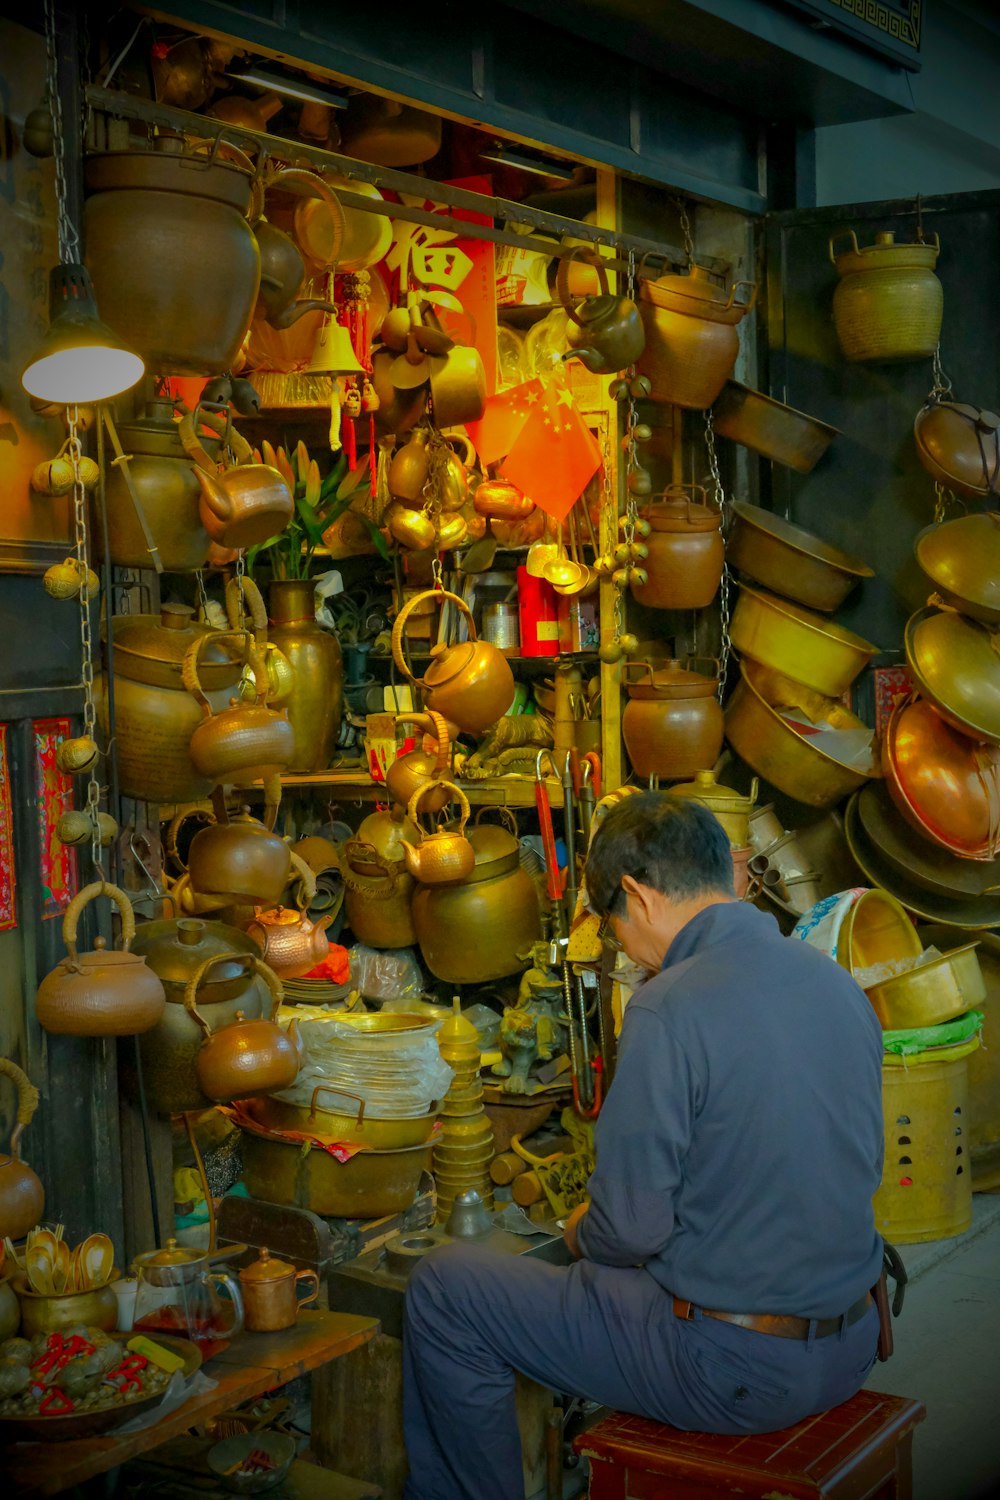 a man sitting on a stool in a room filled with pots and pans